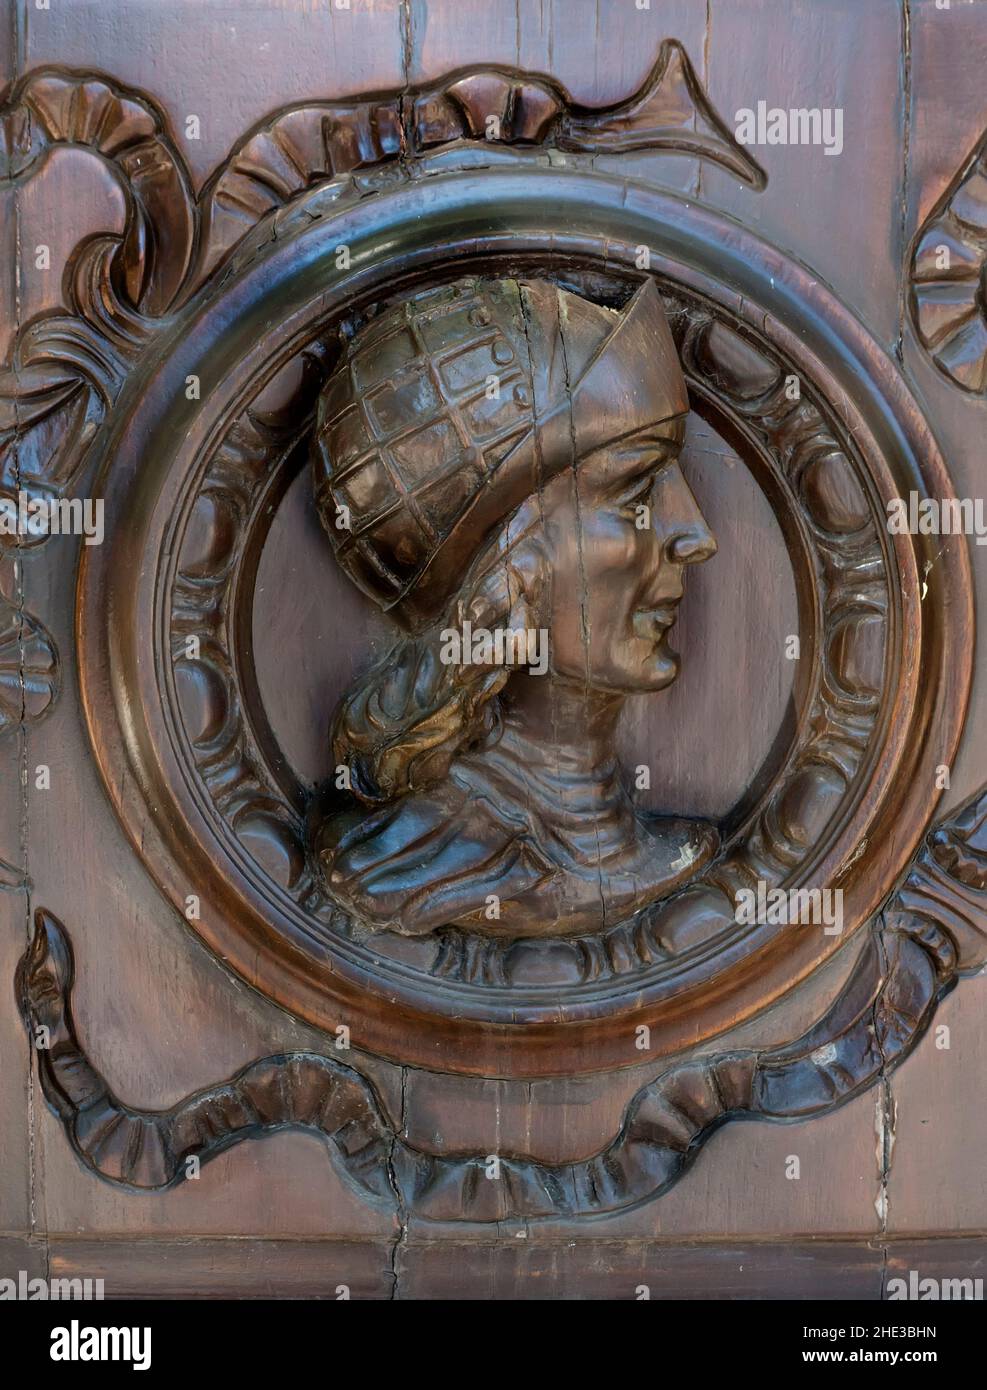 Relief art sculpted on wooden gate in Buenos Aires, Argentina Stock Photo